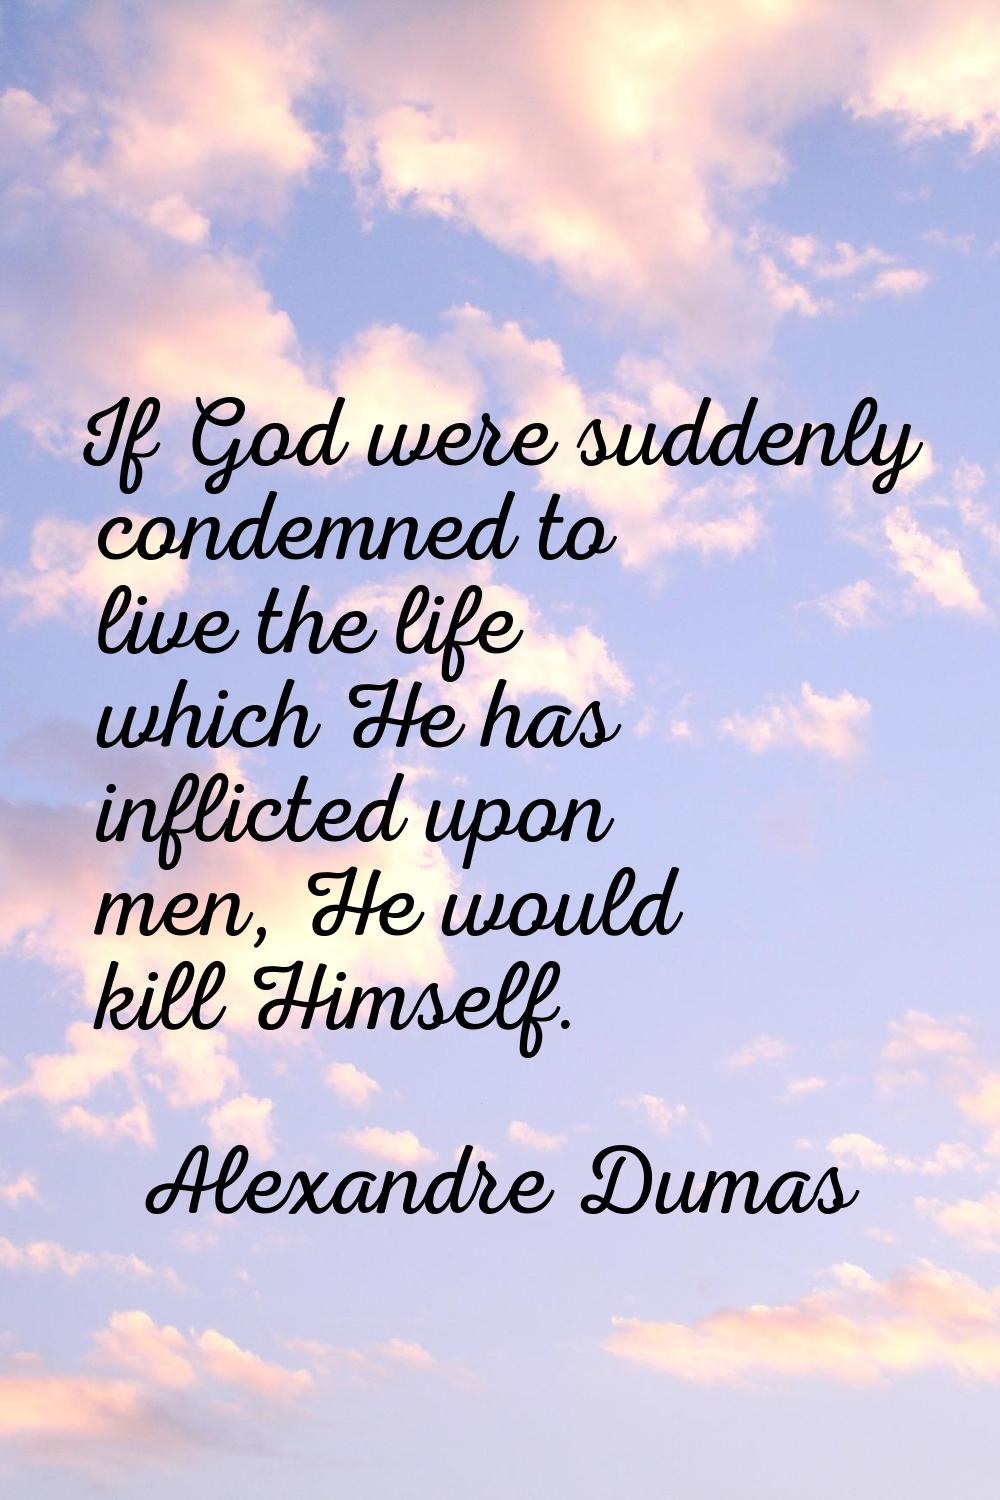 If God were suddenly condemned to live the life which He has inflicted upon men, He would kill Hims